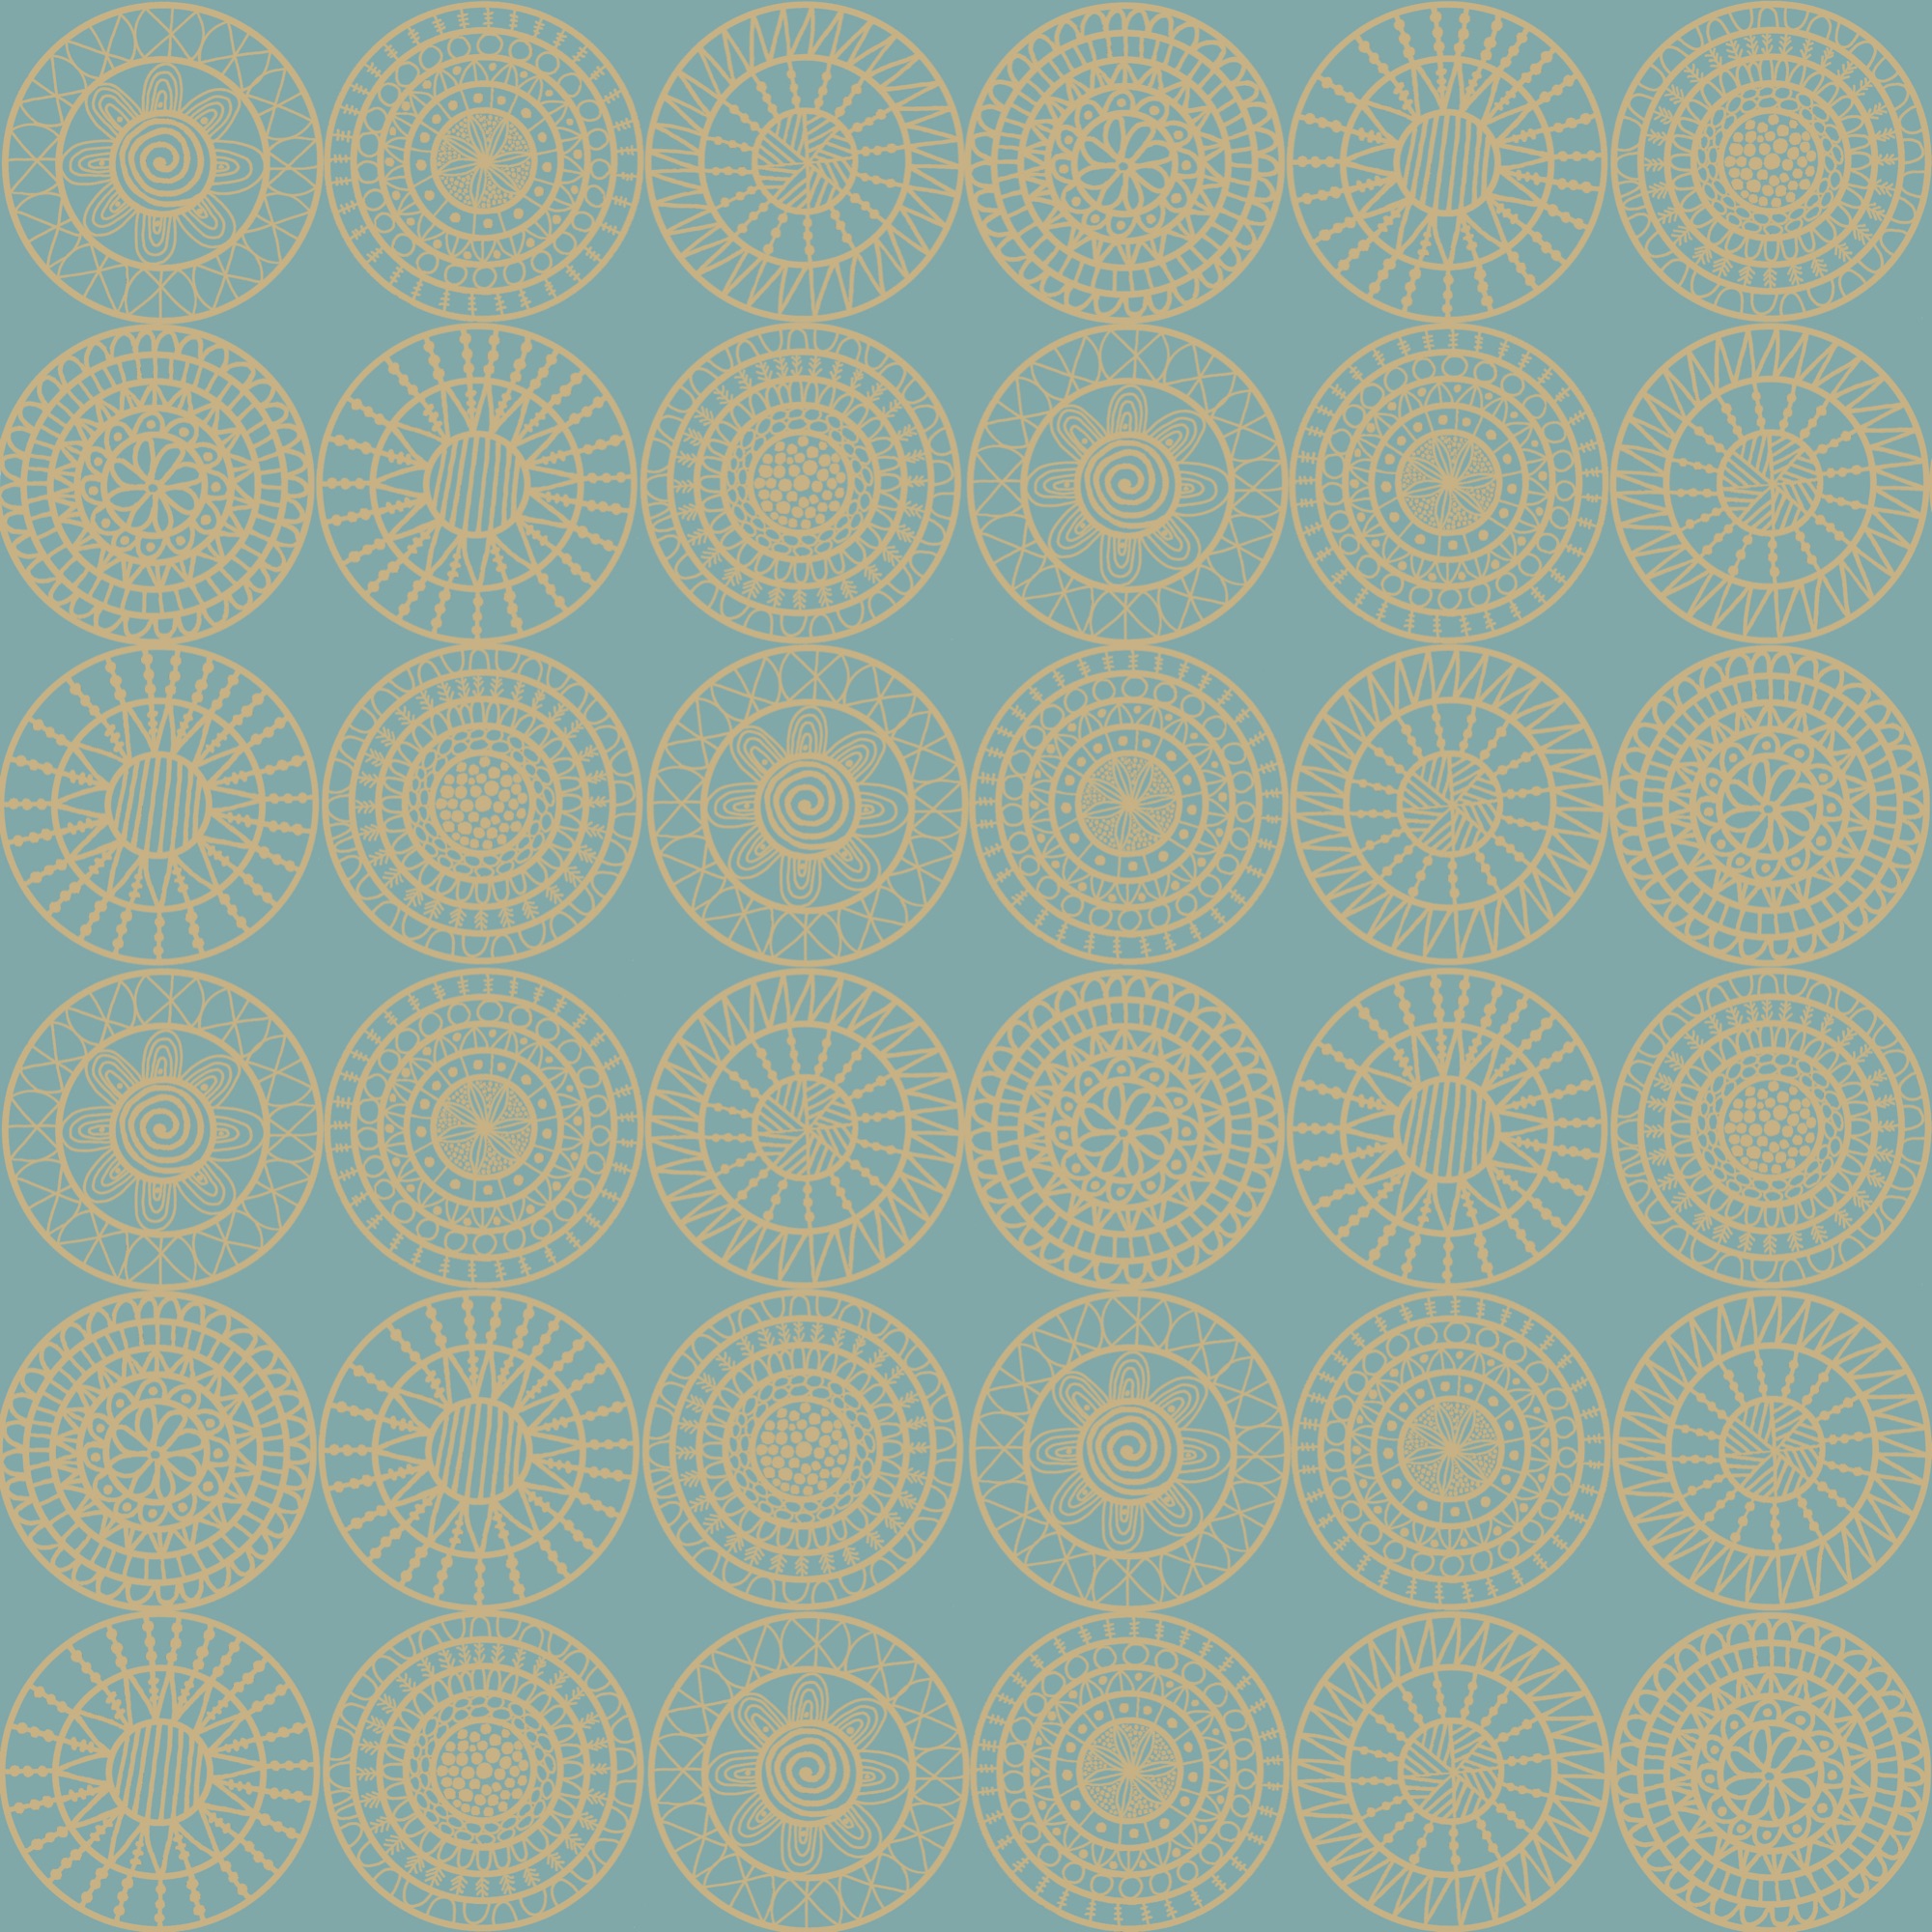 Concentric Circles - gold on green - fabric design